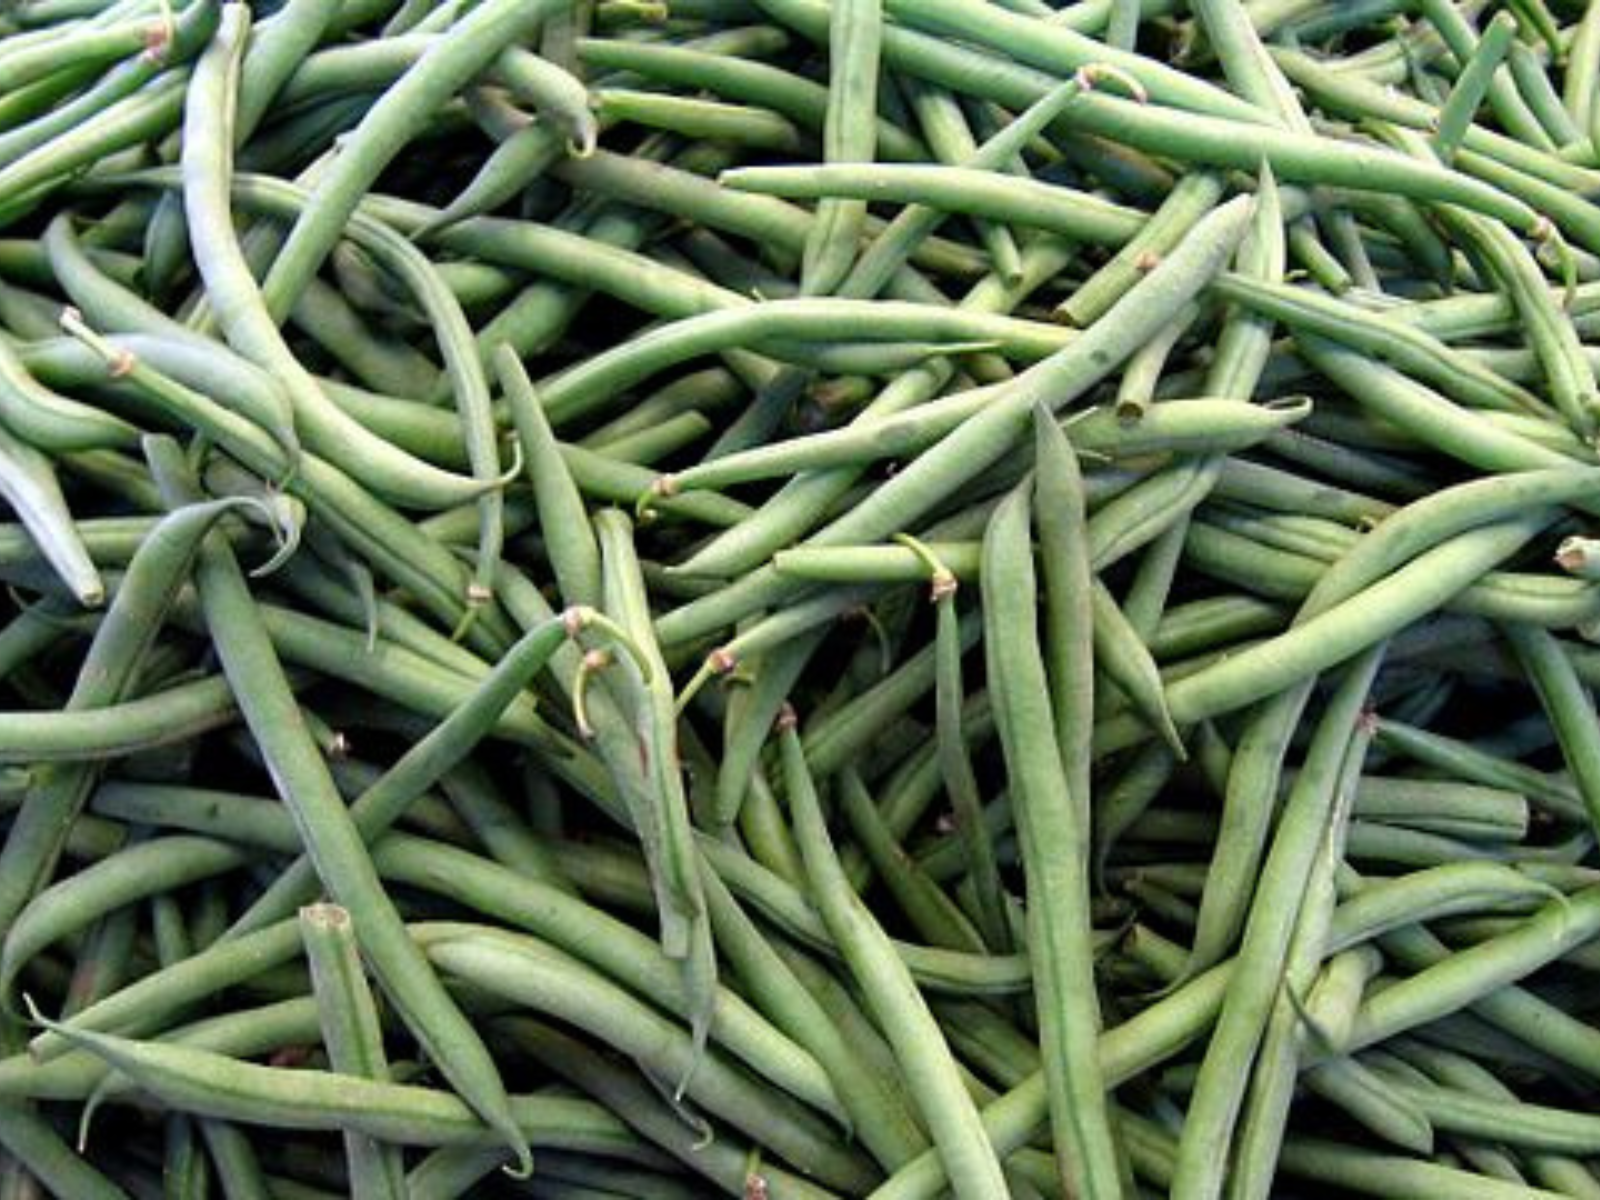 A pile of long, thin green beans.